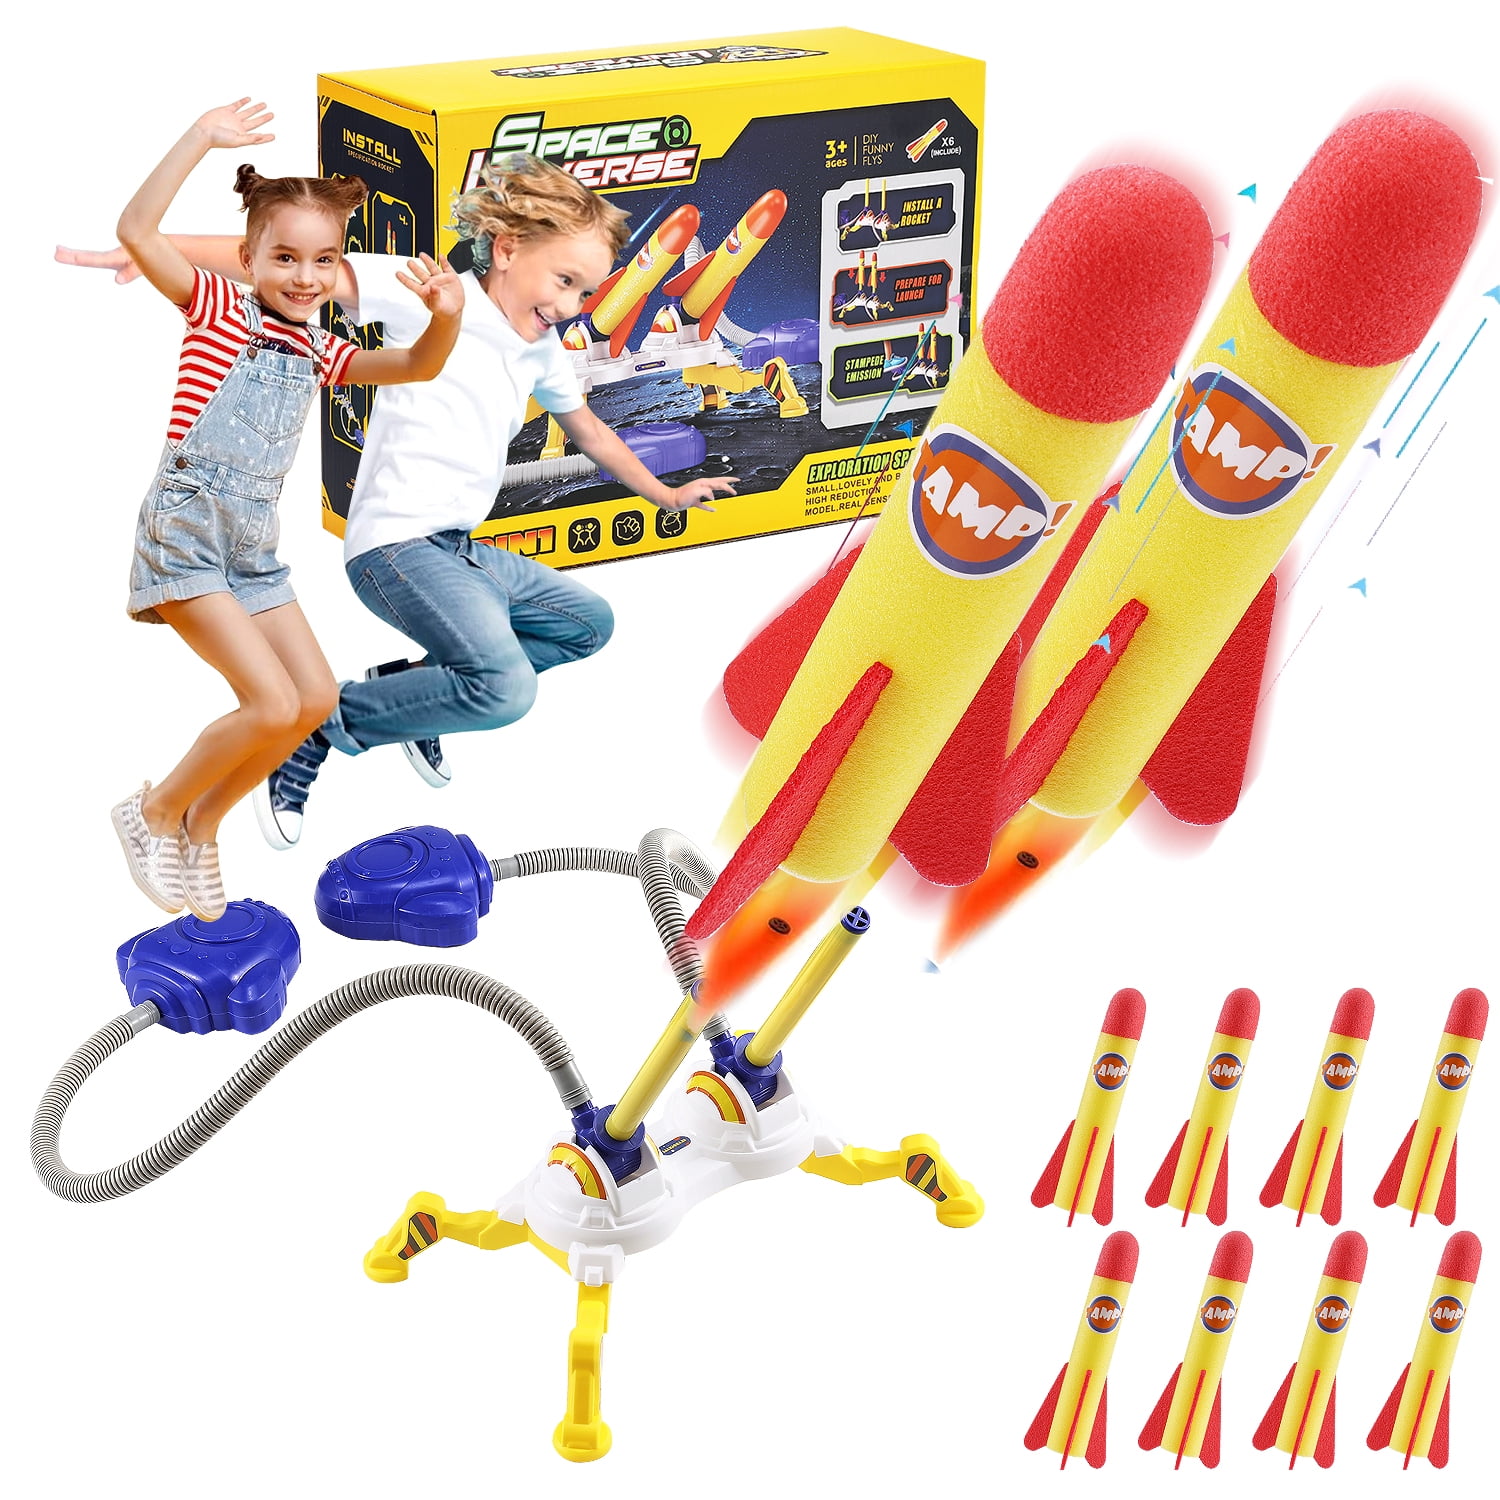 Anpro Toy Rocket Launcher Set for Kids, Rocket Outdoor Toys with 8